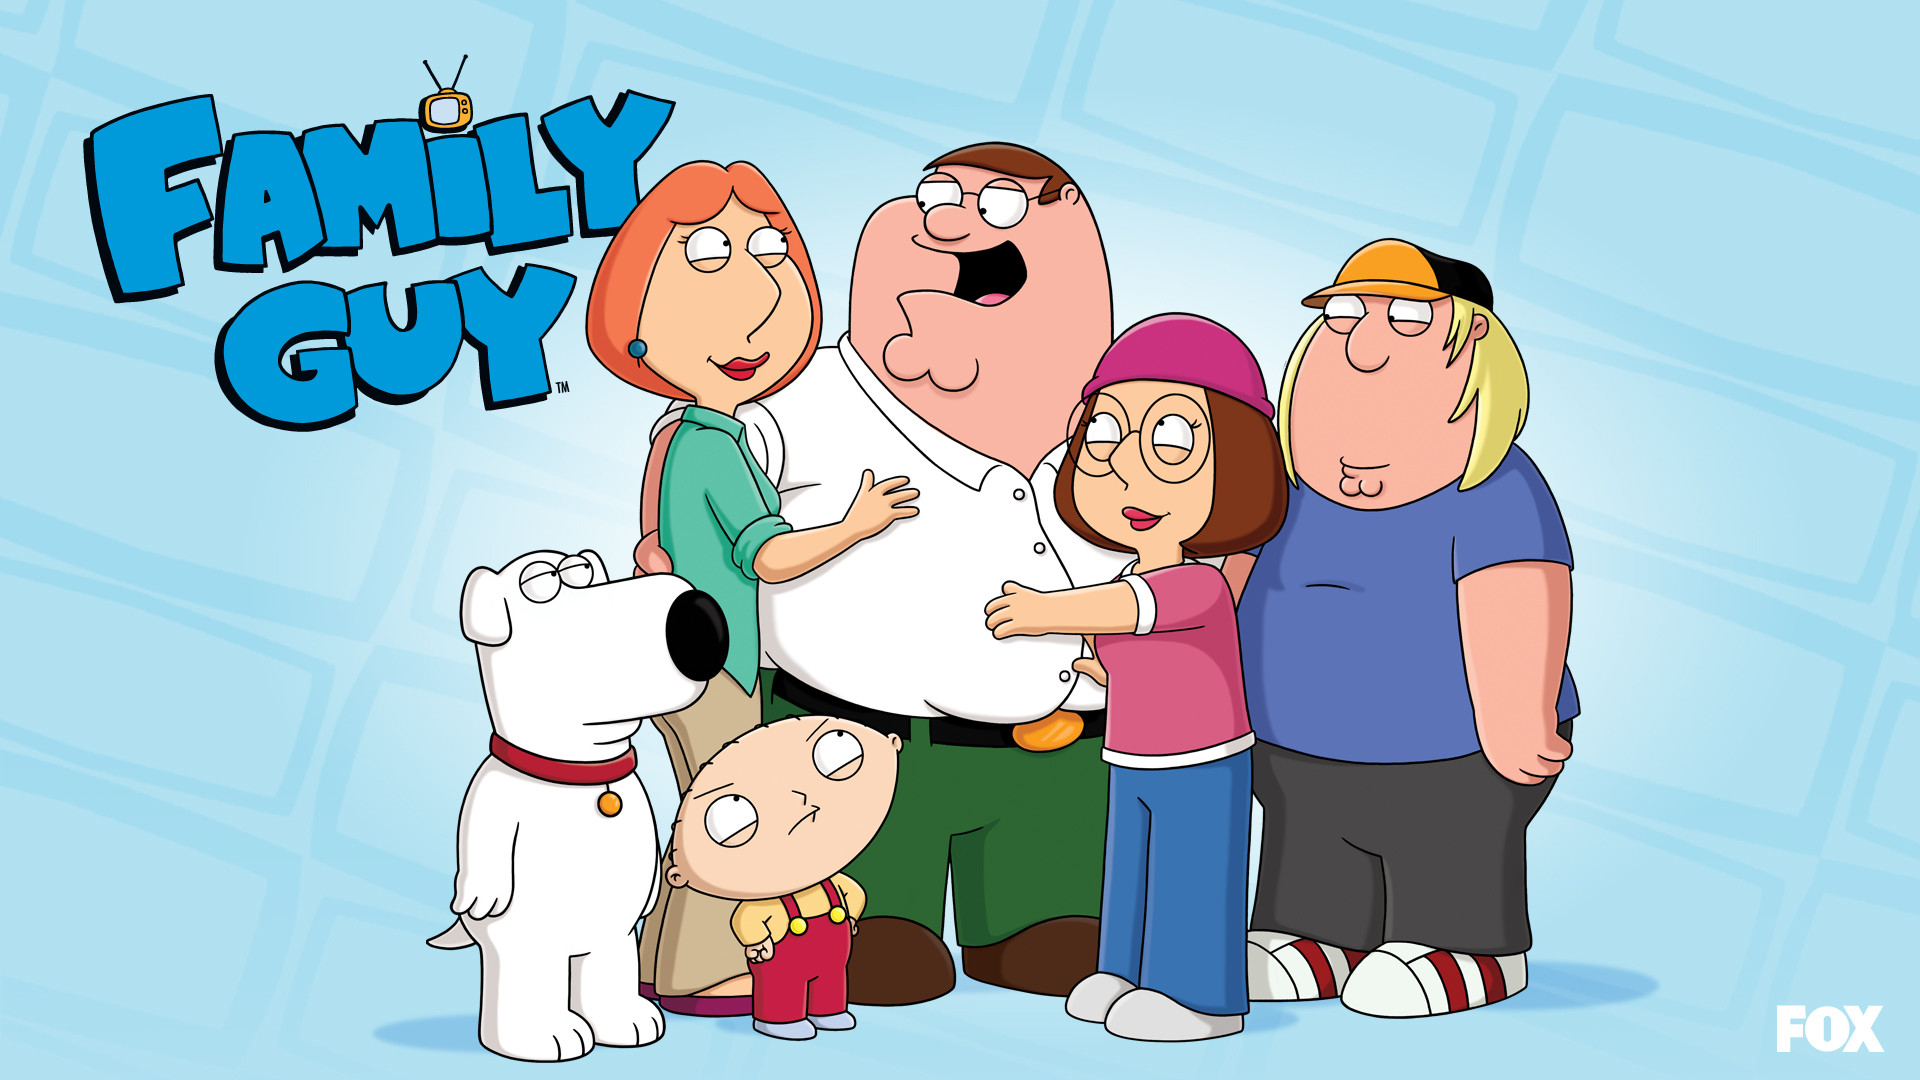 1920x1080 Will Be in an Episode of Family Guy Later This Year | How2BeCool .